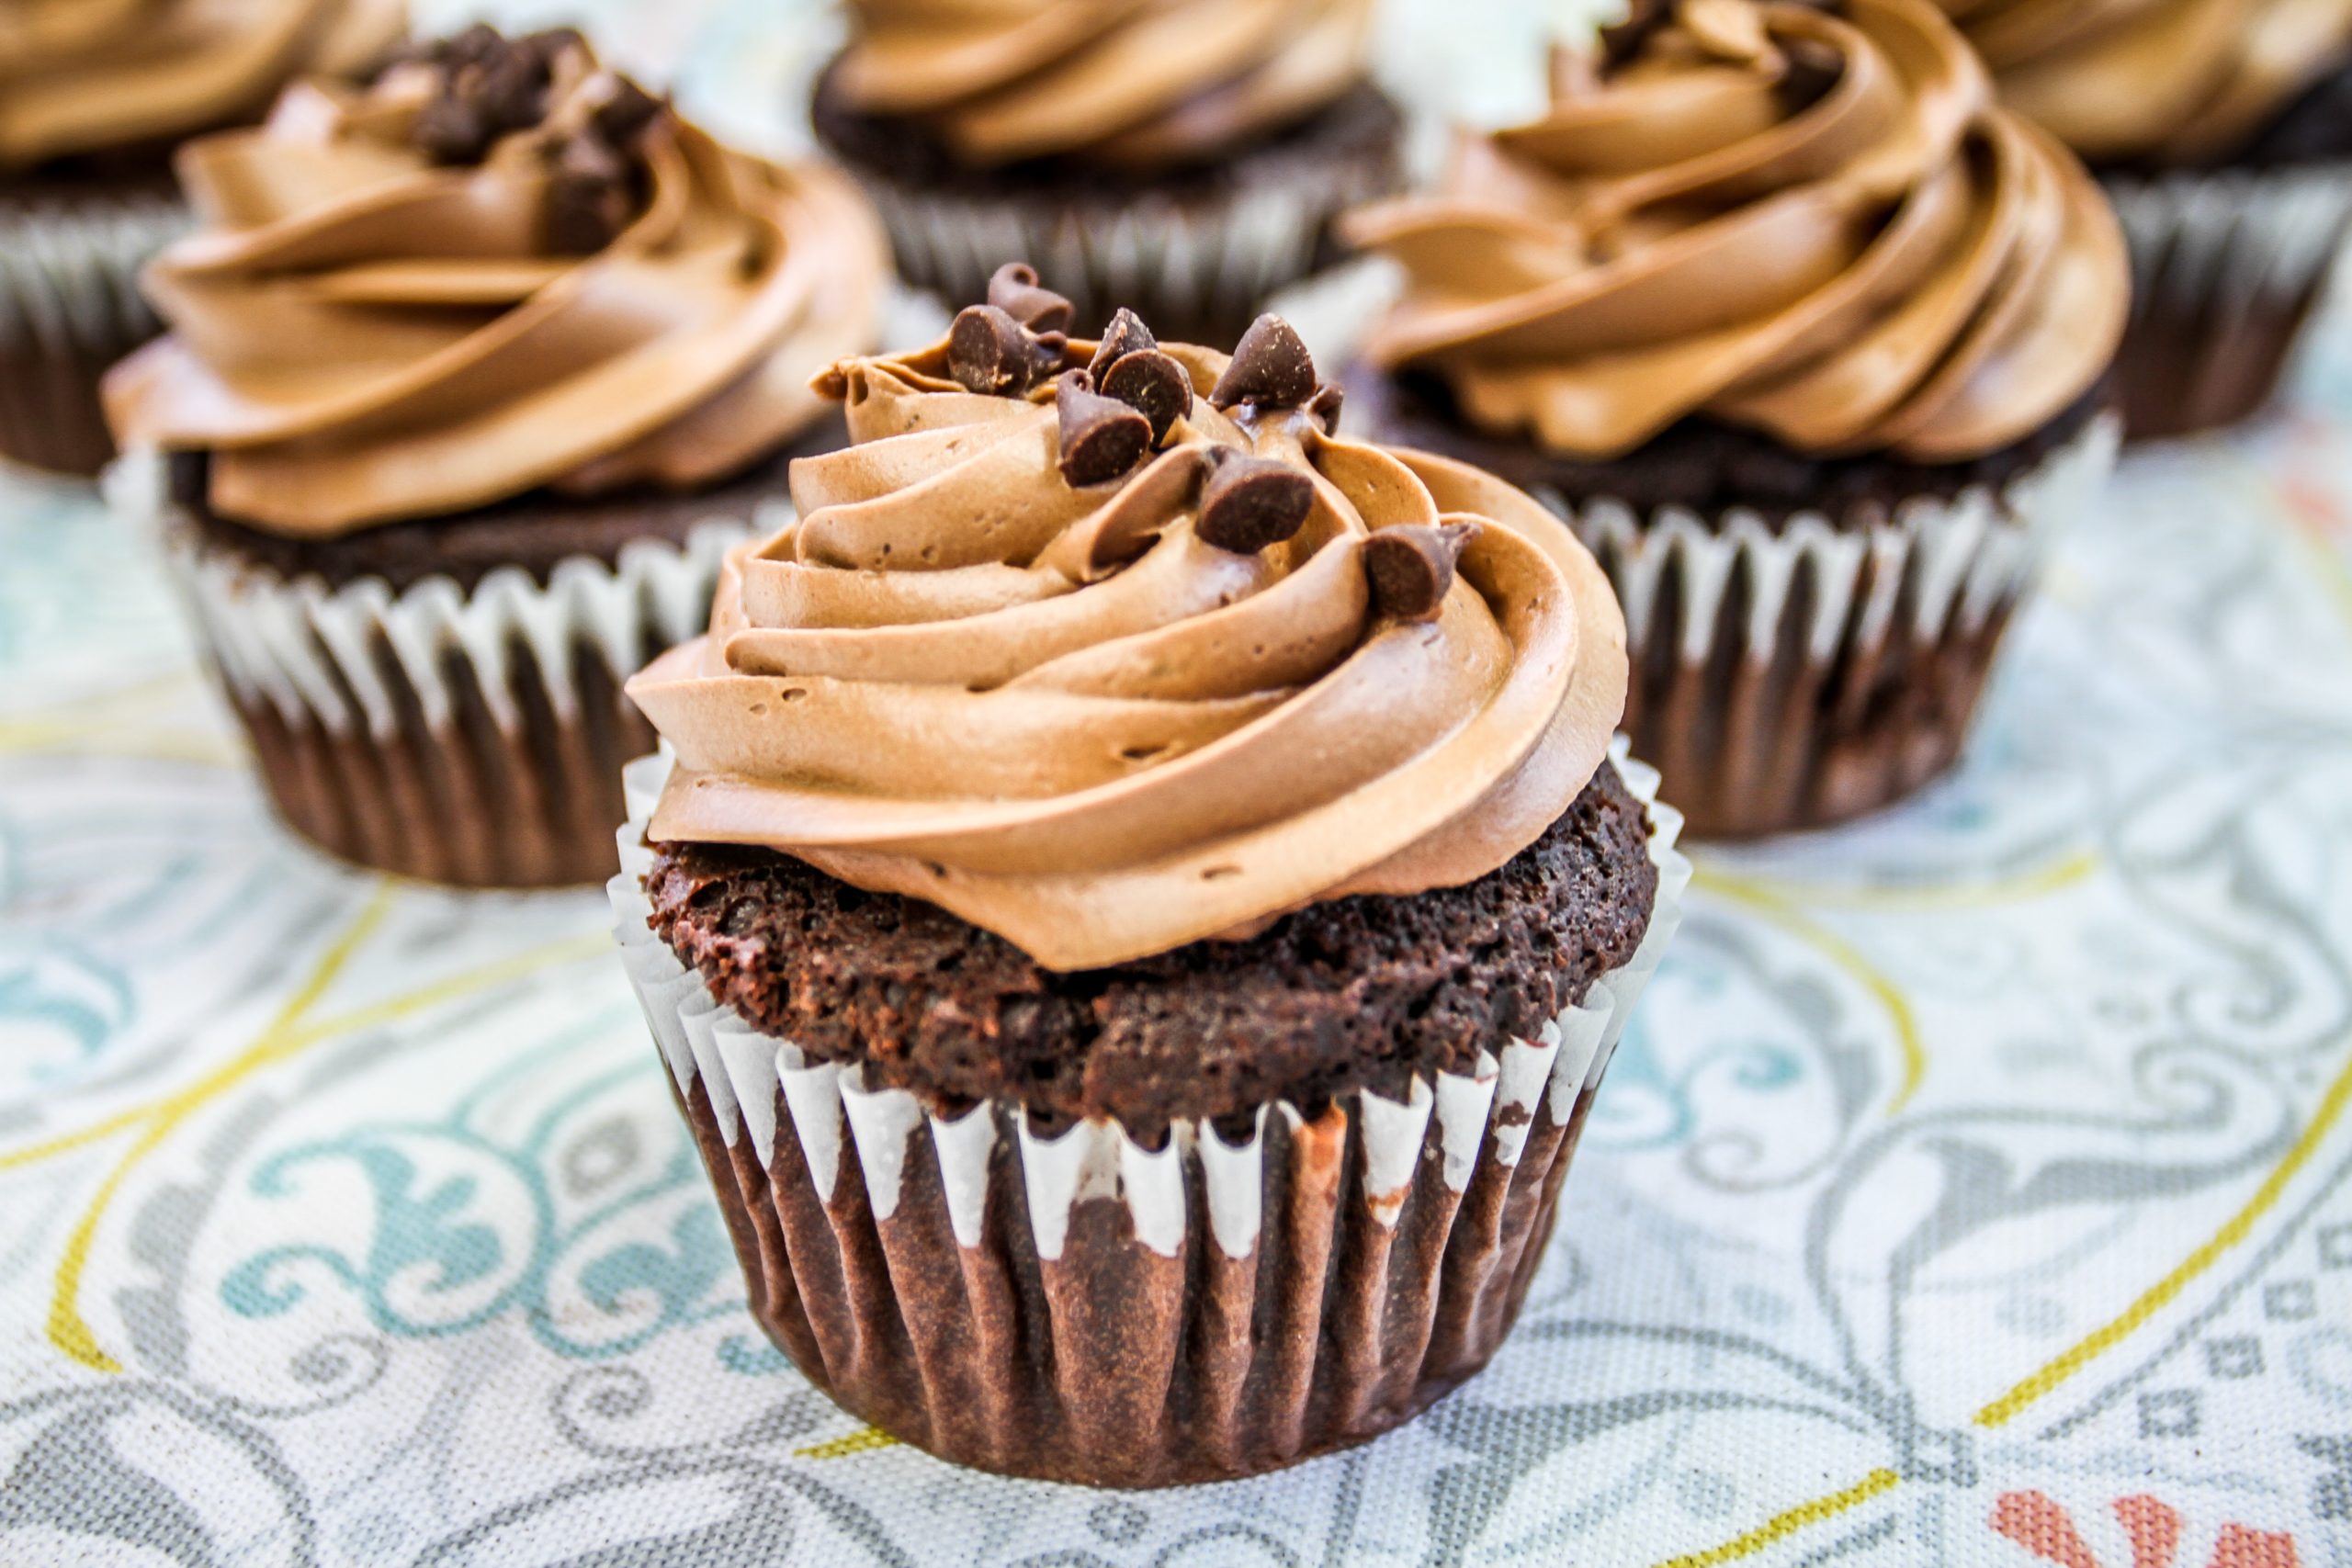 Chocolate cupcakes with butter cream and chocolate sprinkles